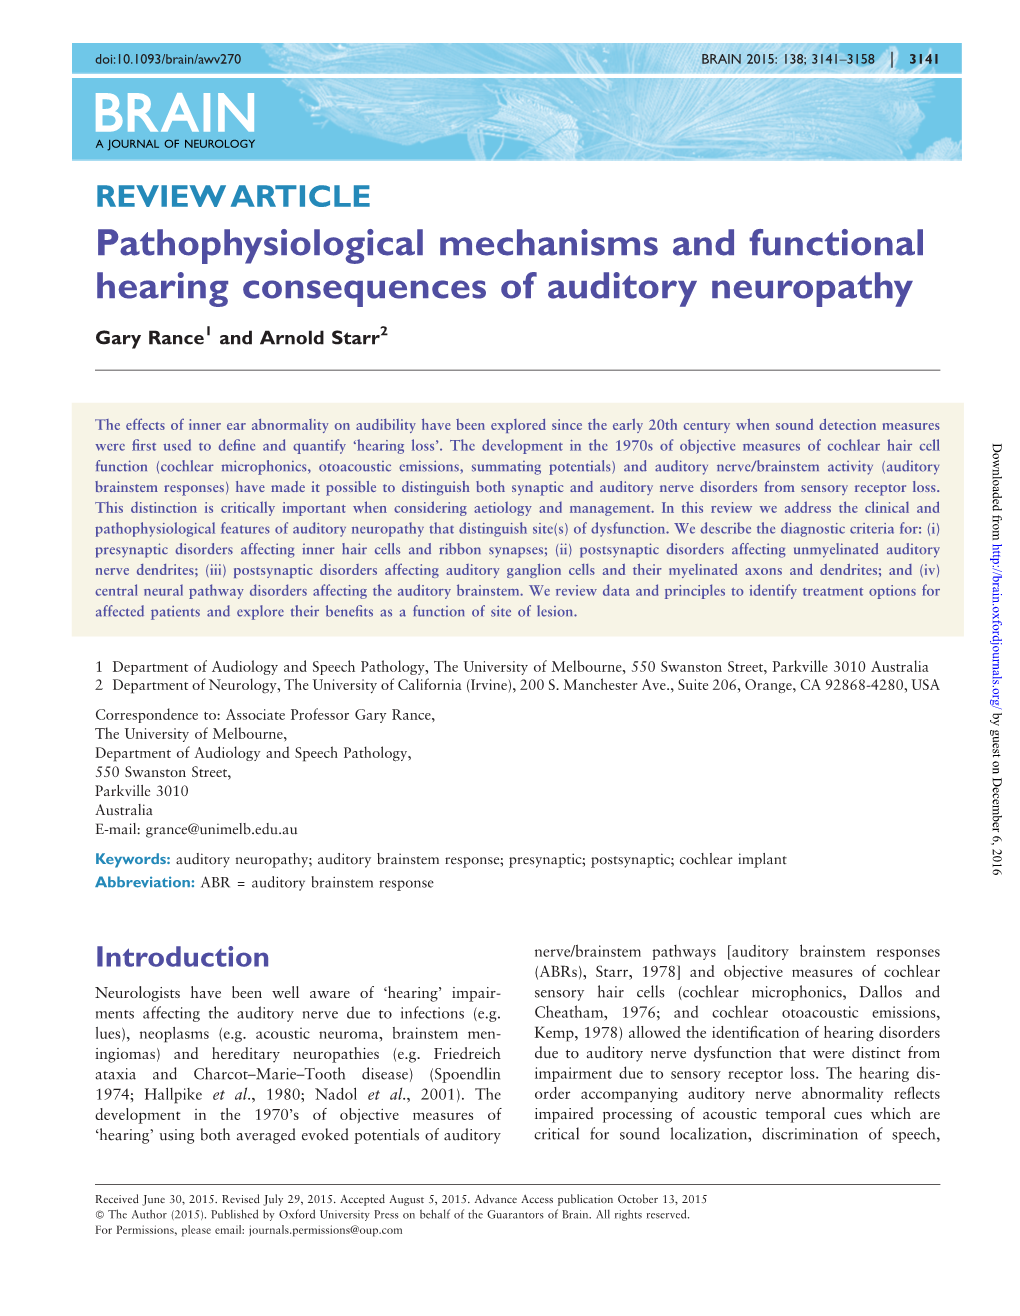 Pathophysiological Mechanisms and Functional Hearing Consequences of Auditory Neuropathy